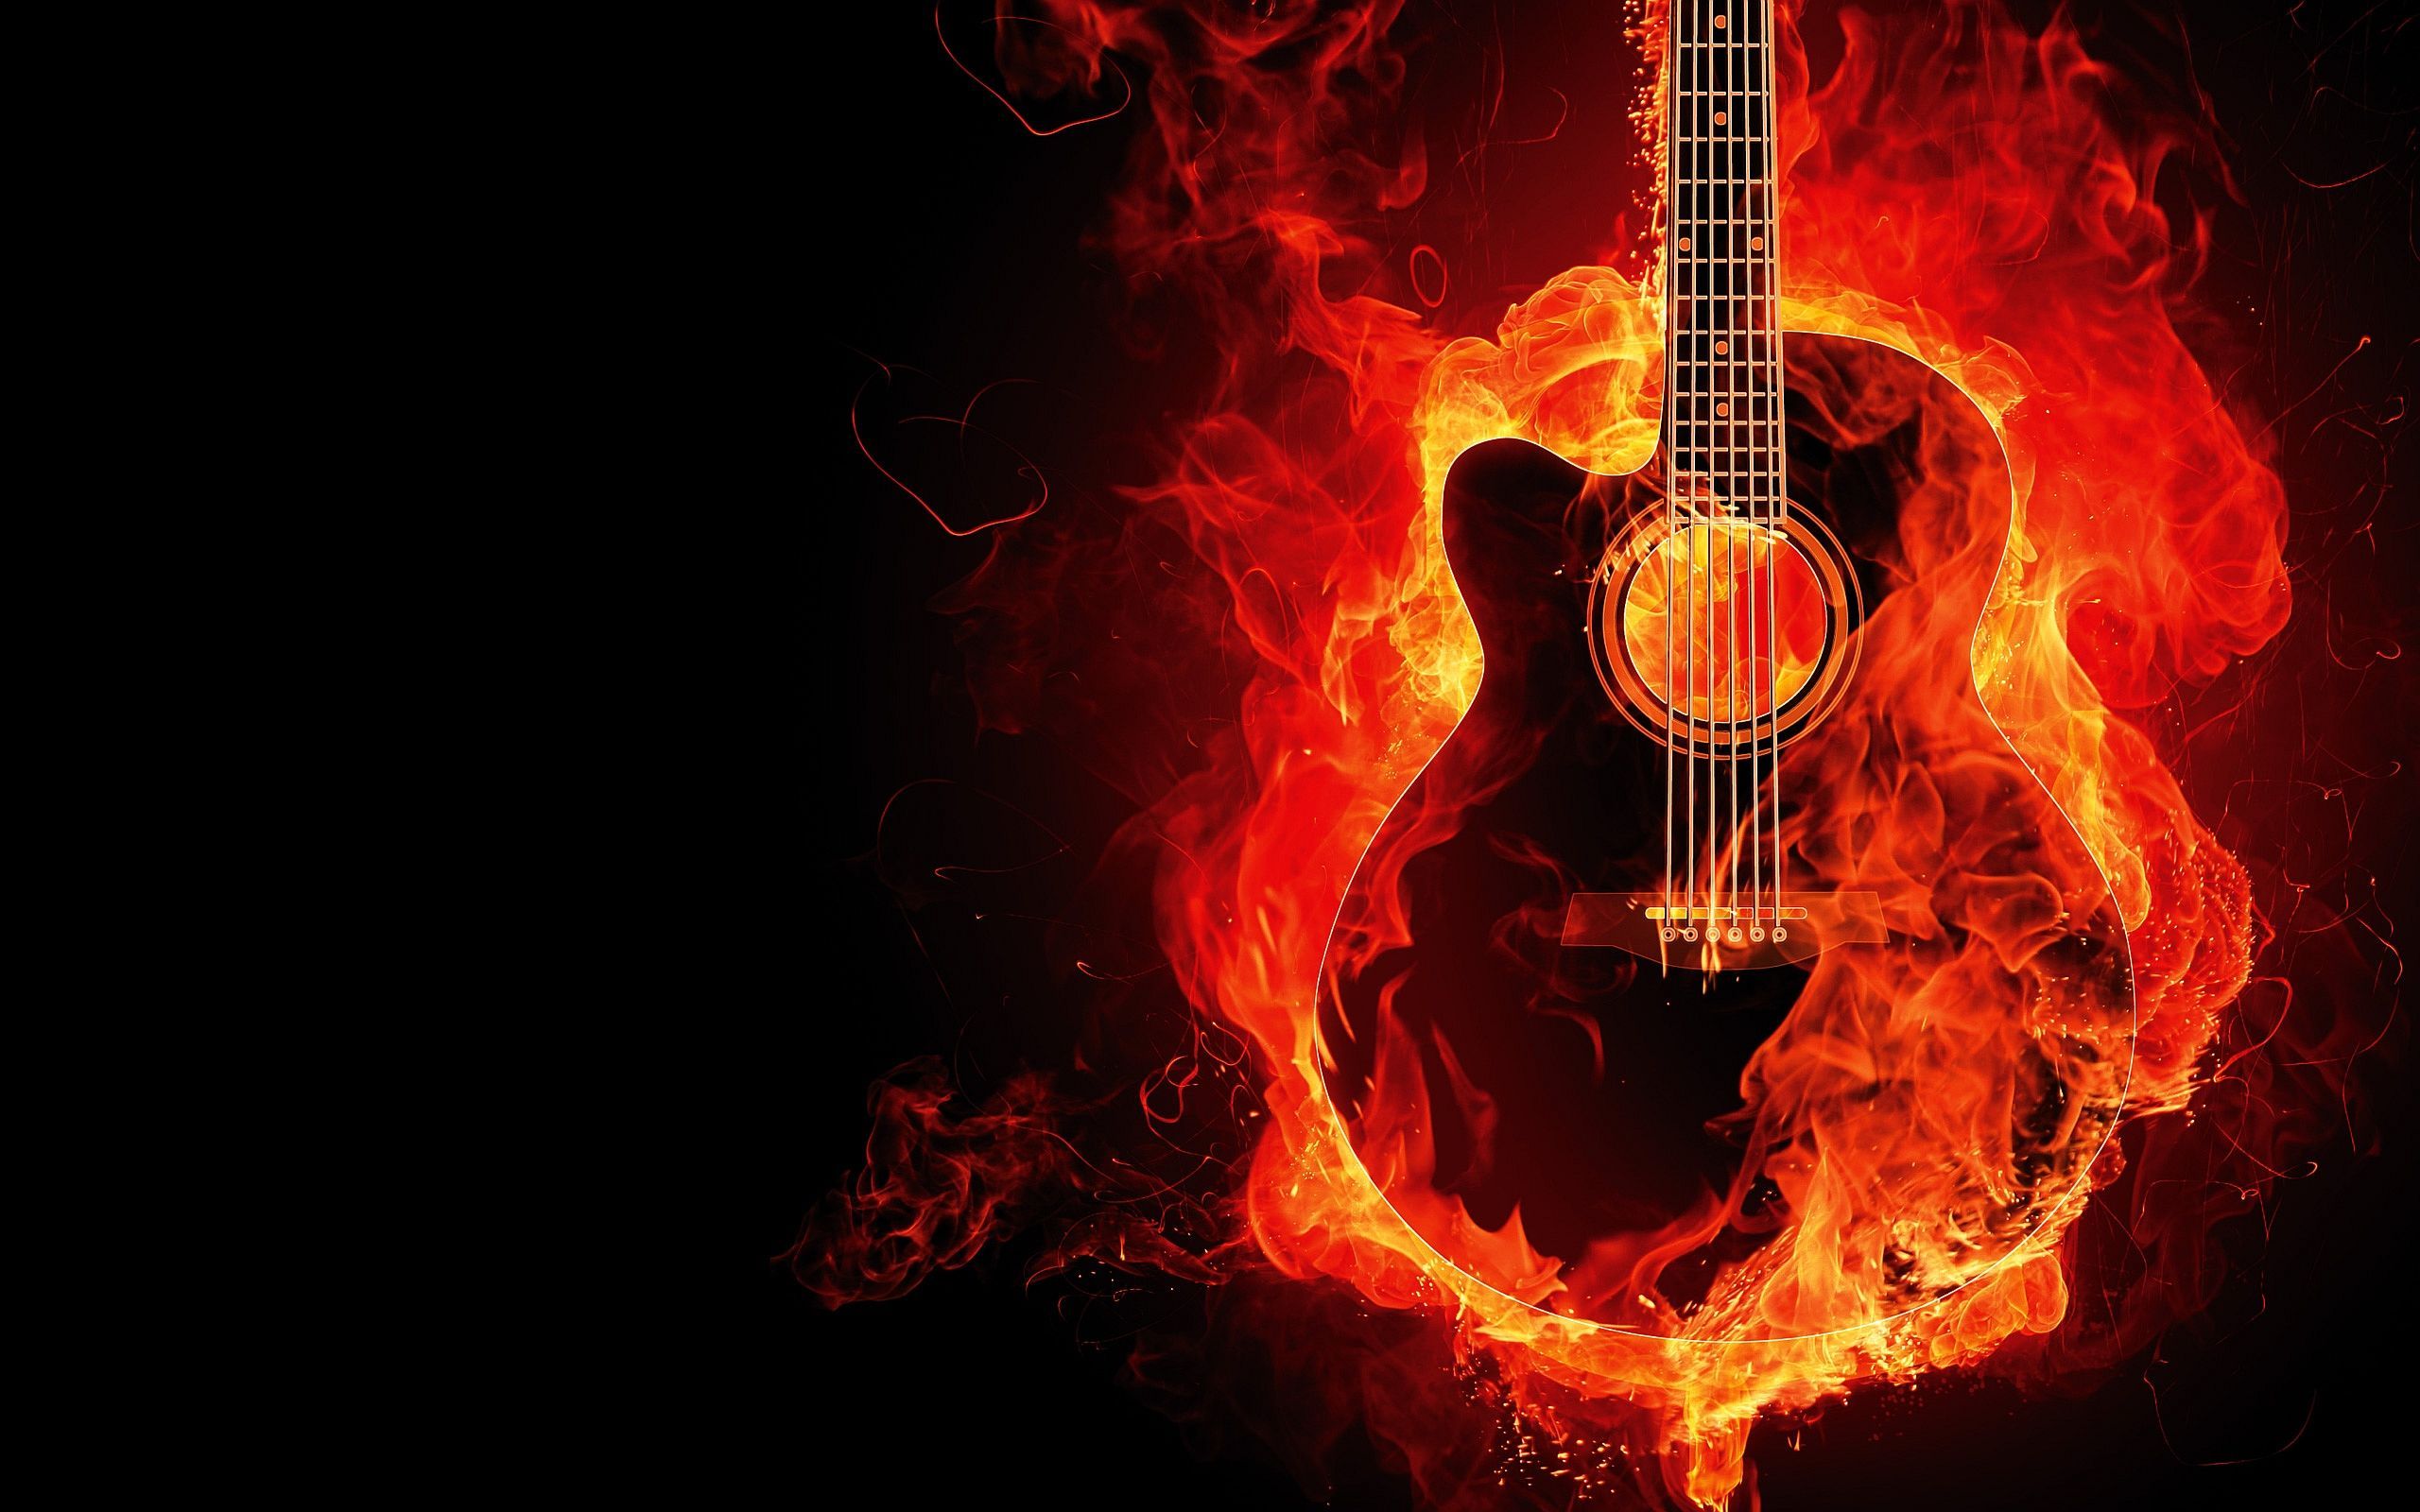 Guitar on Fire hd wallpaper Only hd wallpapers